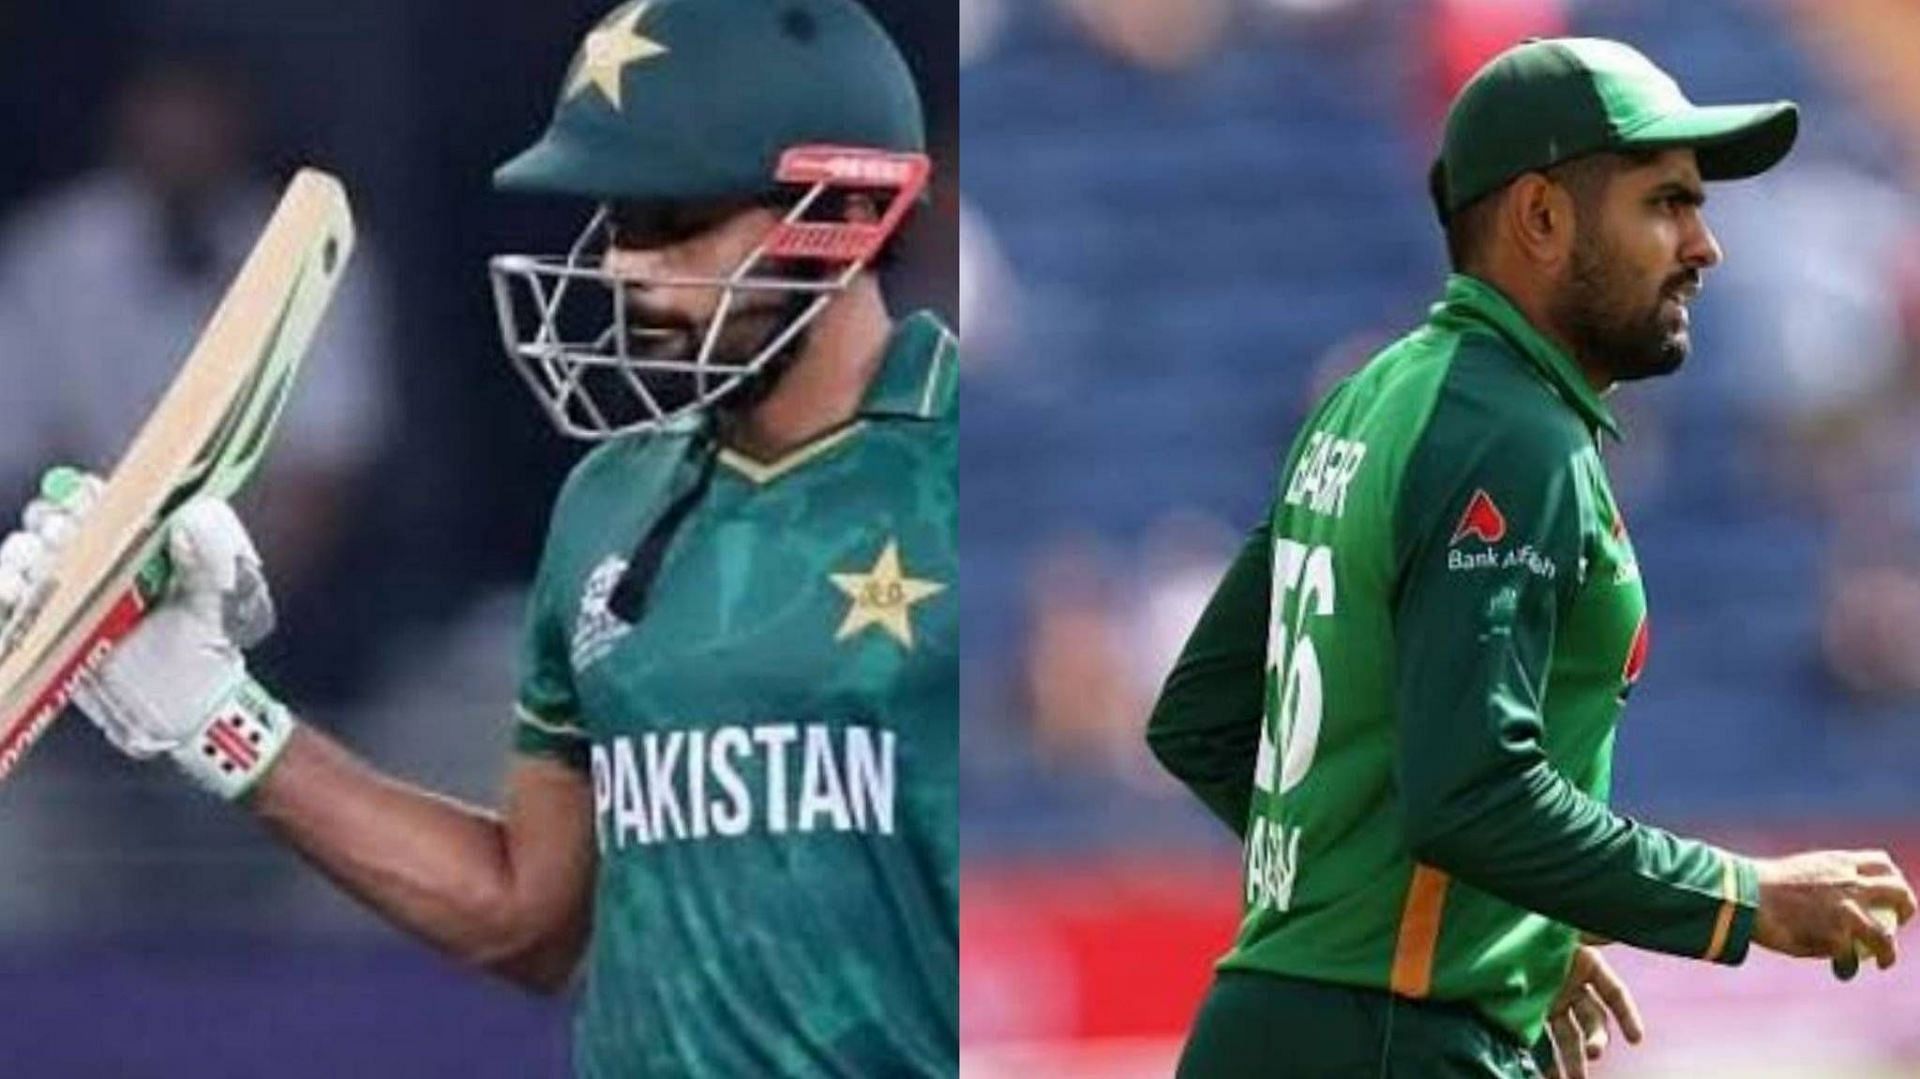 Babar Azam continues to be the world number 1 batter in ODIs